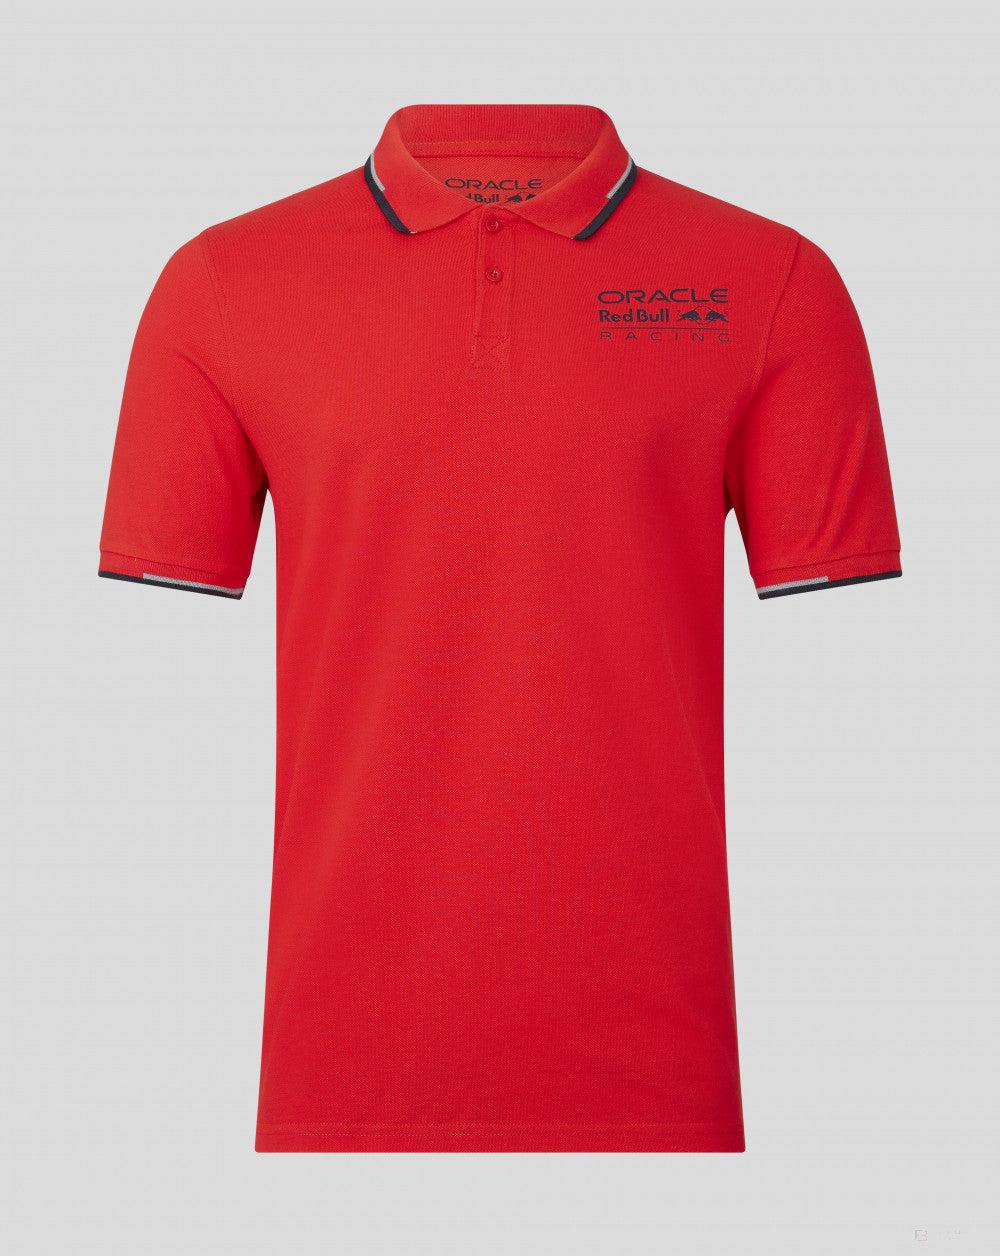 Red Bull Racing polo, core, red - FansBRANDS®